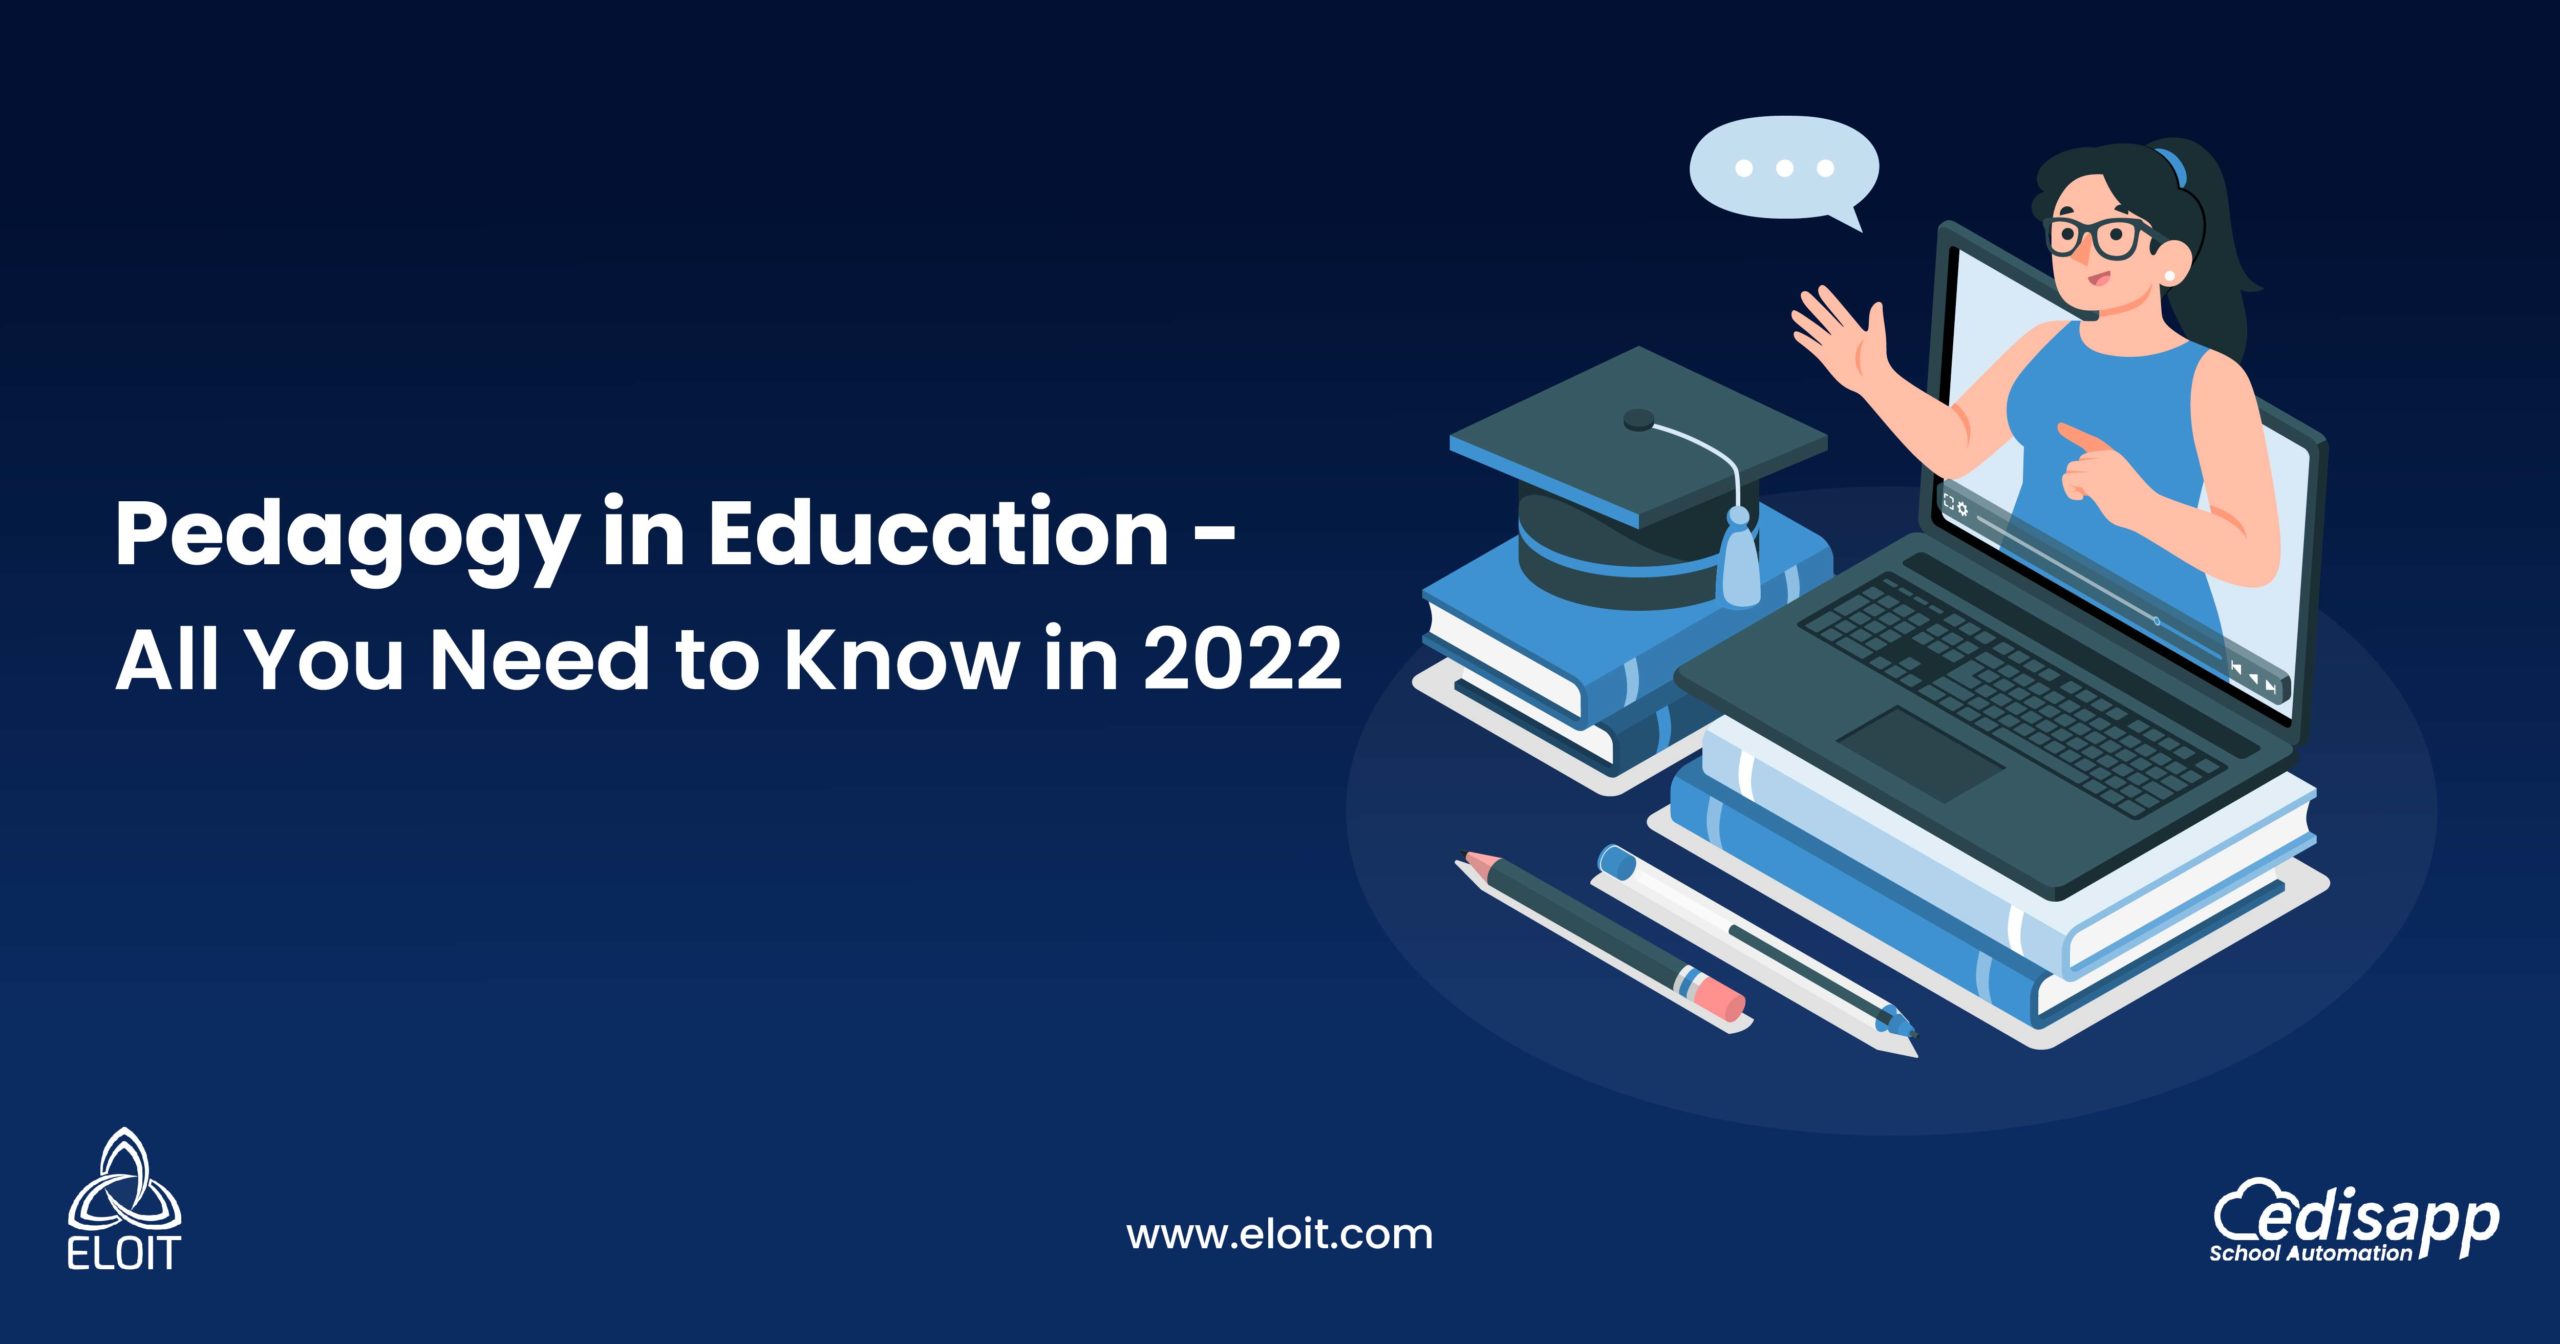 Pedagogy in Education – All You Need to Know in 2022